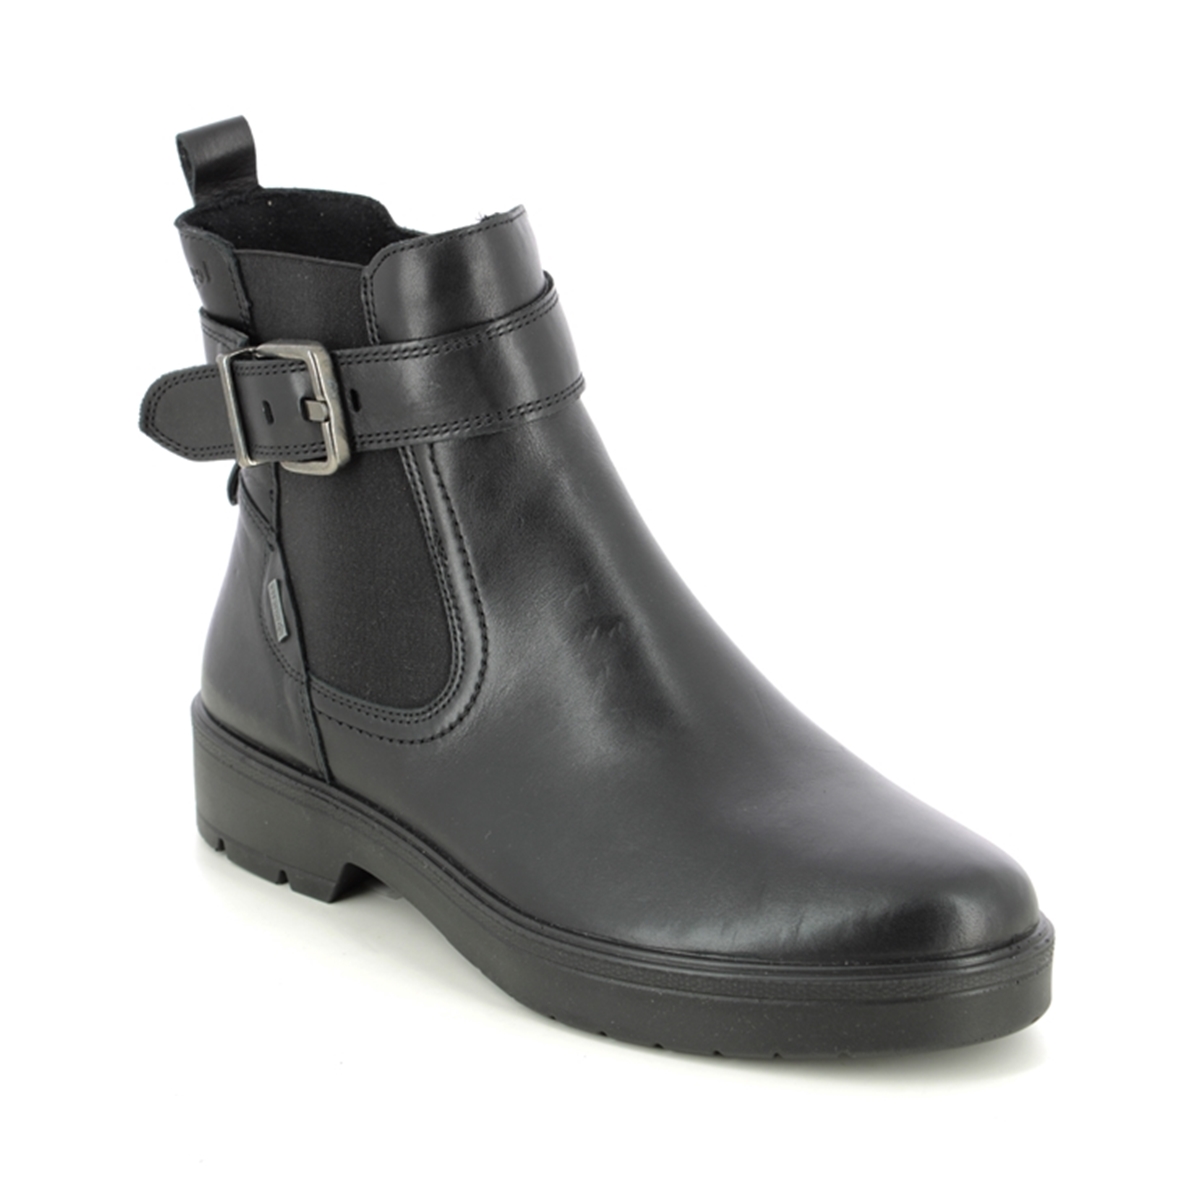 Legero Mystic Gtx Chelsea Black leather Womens Chelsea Boots 2000192-0100 in a Plain Leather in Size 7